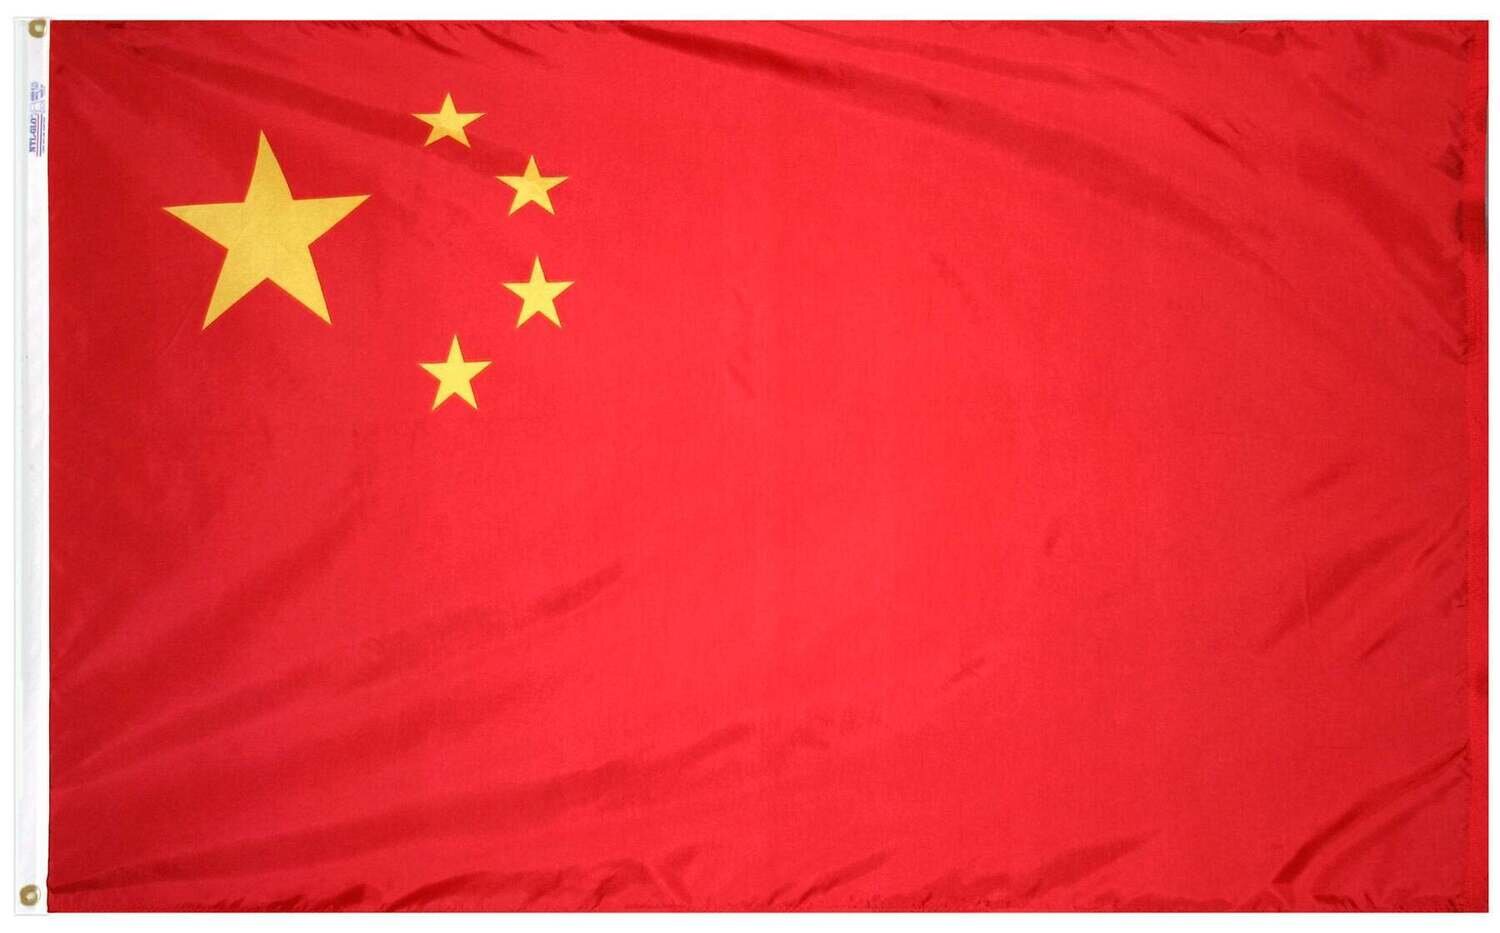 China Flag 2x3 ft. Nylon SolarGuard Nyl-Glo 100% Made in USA to Official United Nations Design Specifications.